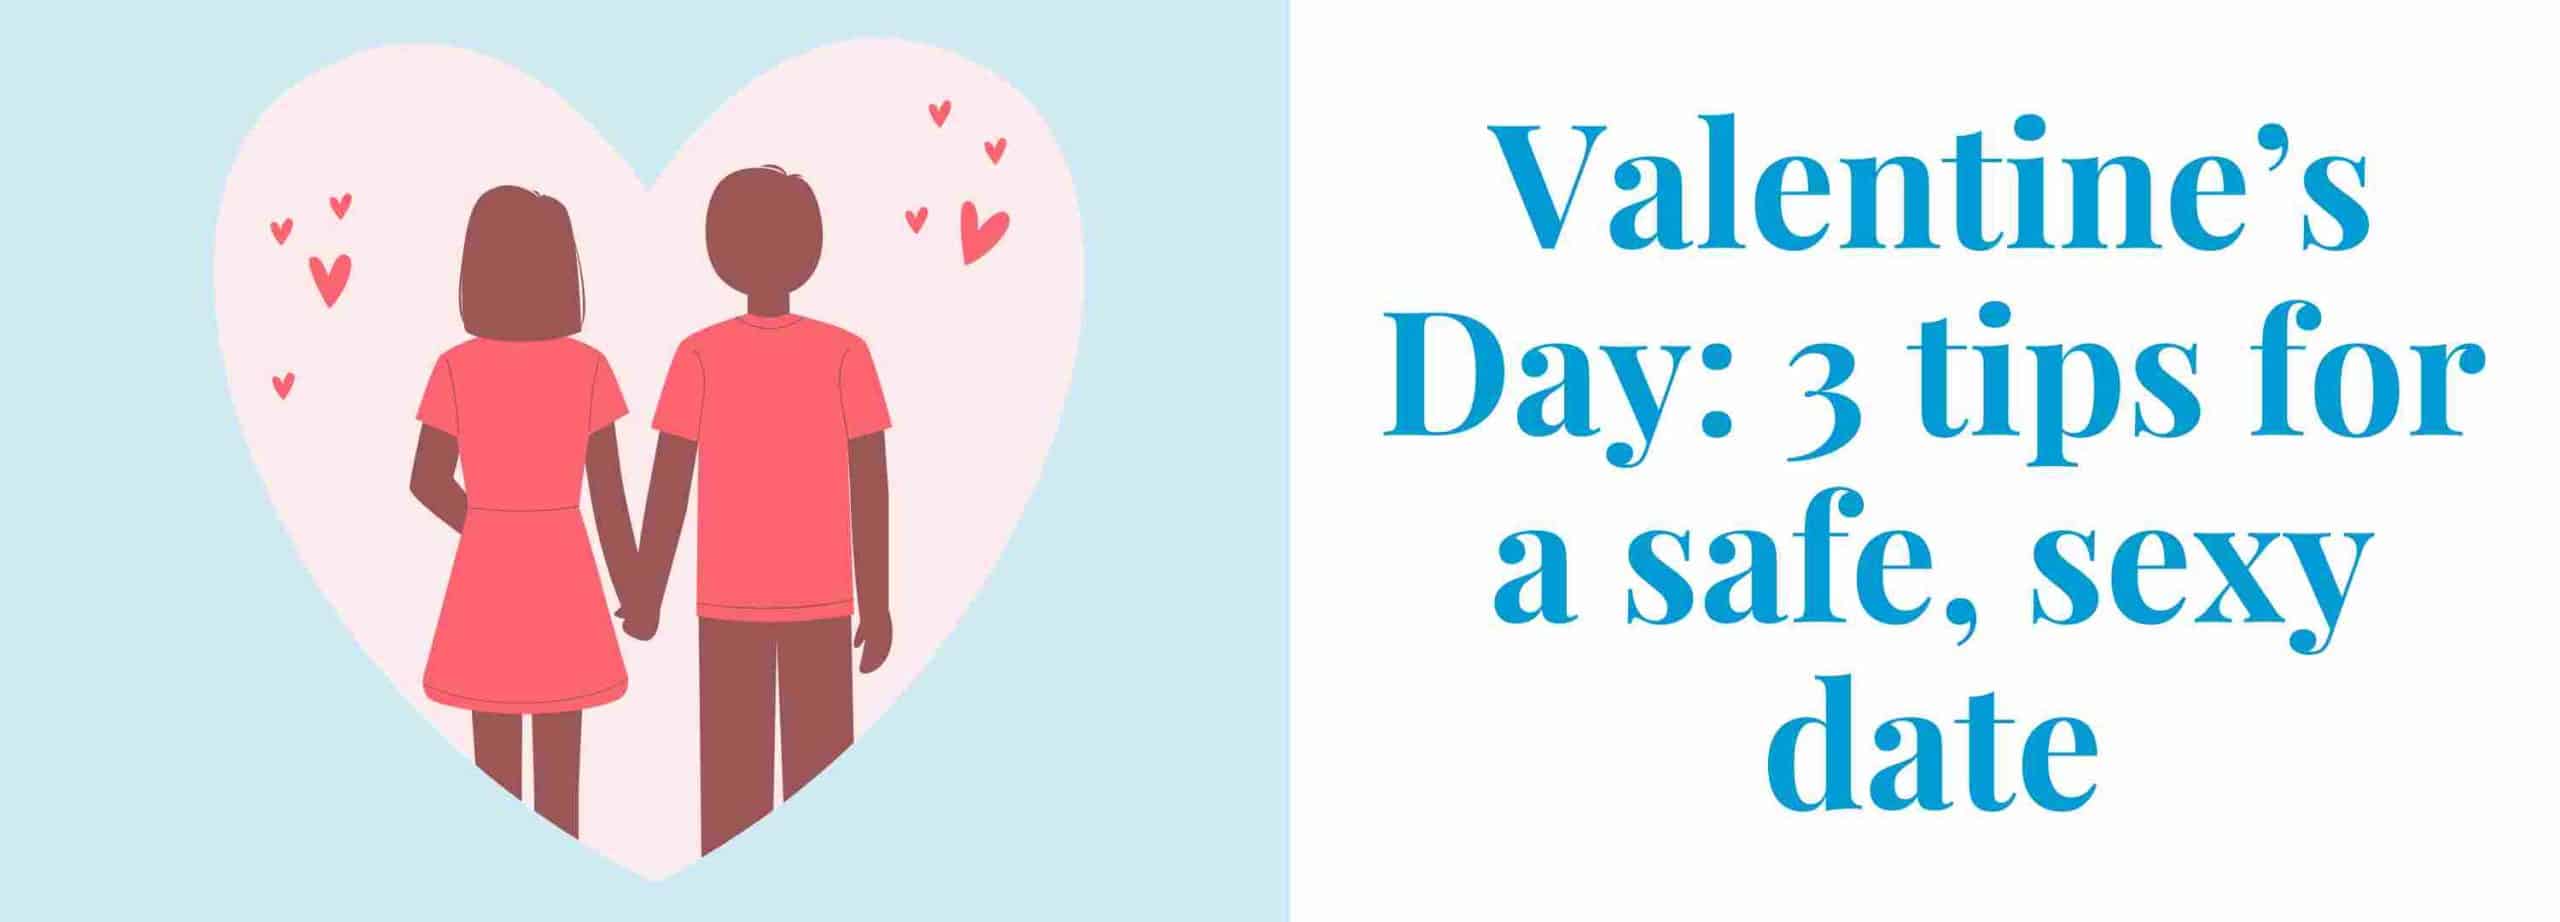 Valentine’s Day: 3 tips for a safe sexy date